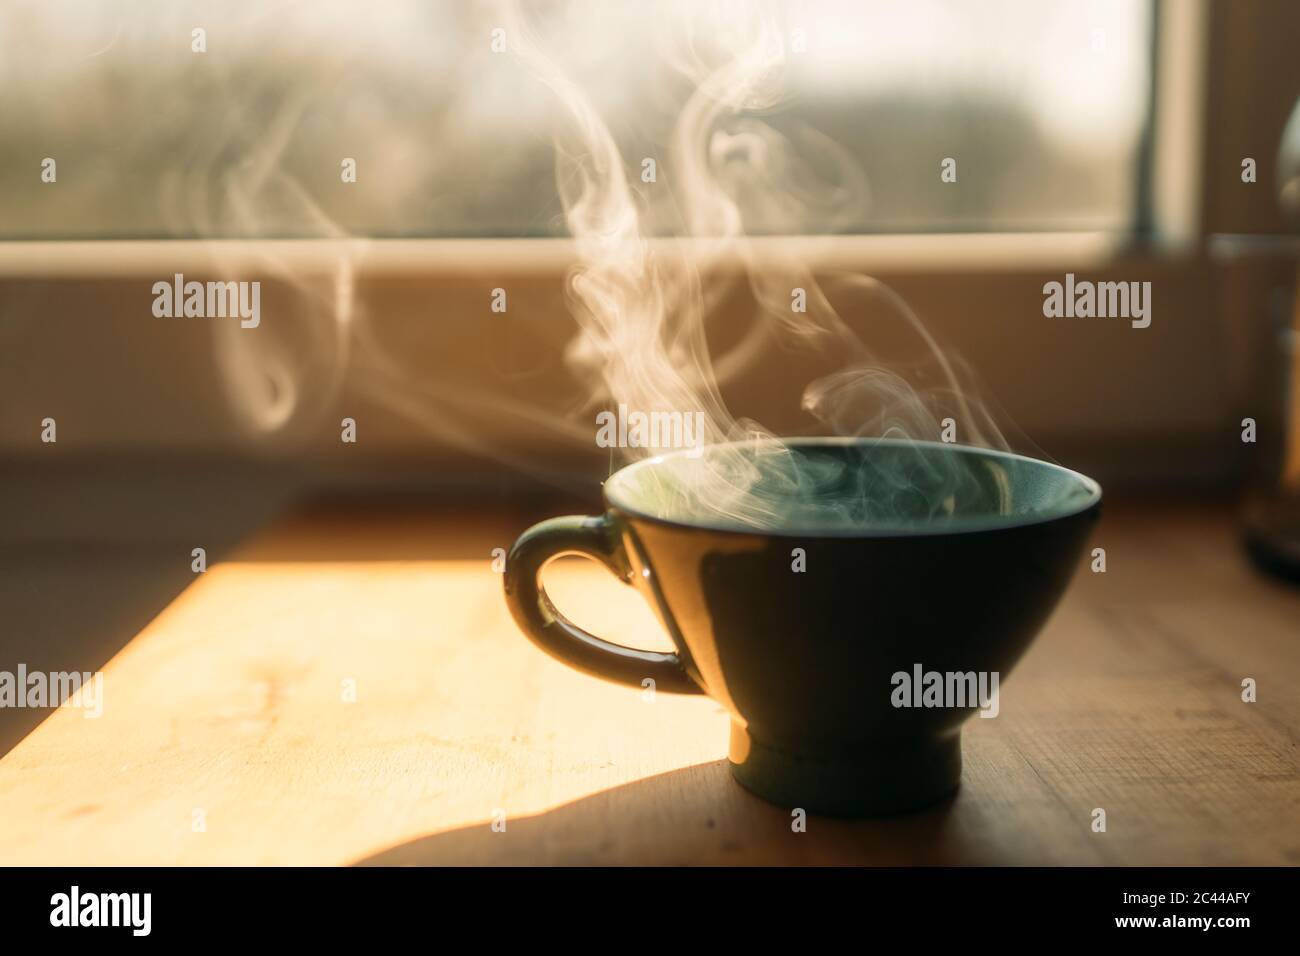 Steam rising from freshly prepared coffee in cup on table at home Stock Photo